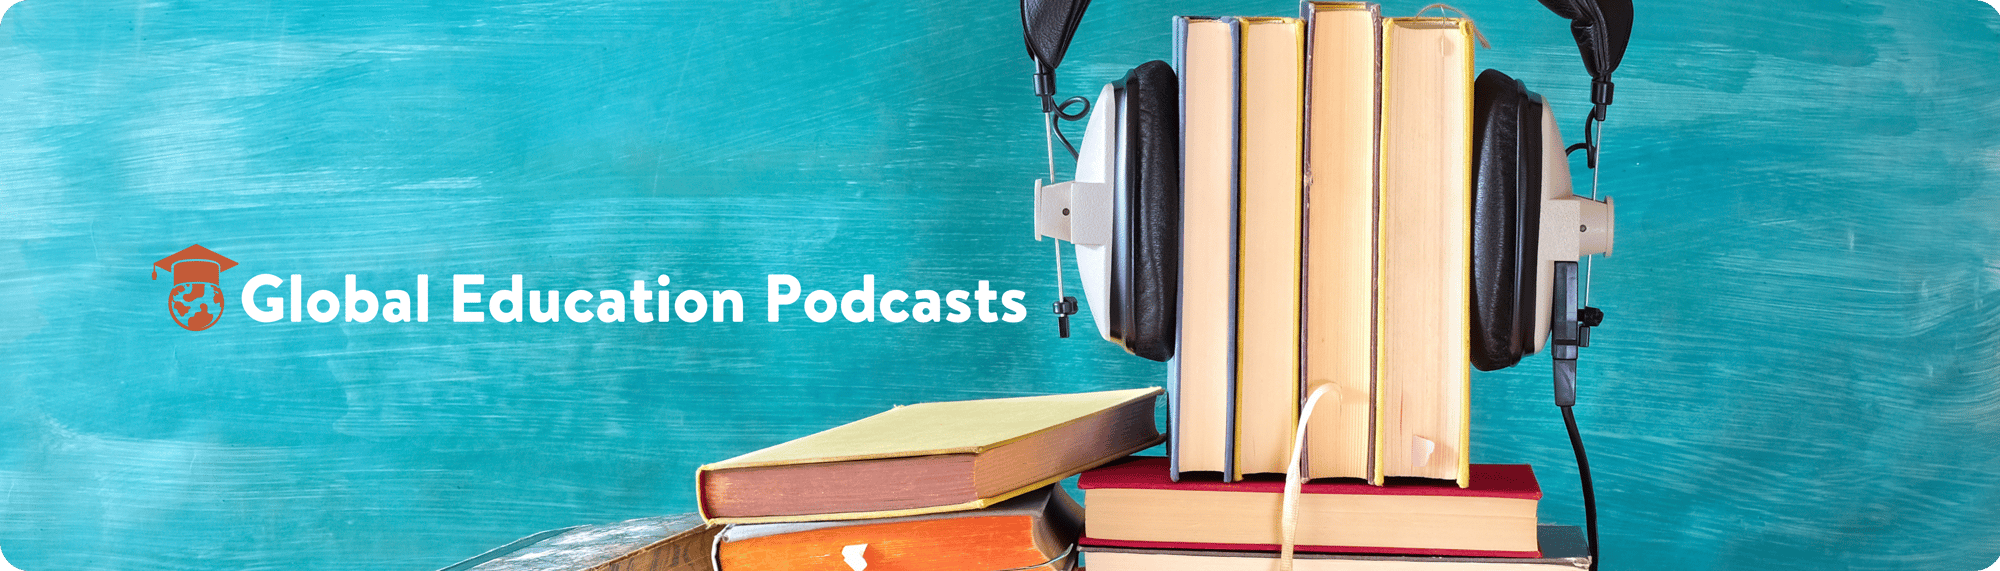 What are Global Education Podcasts?